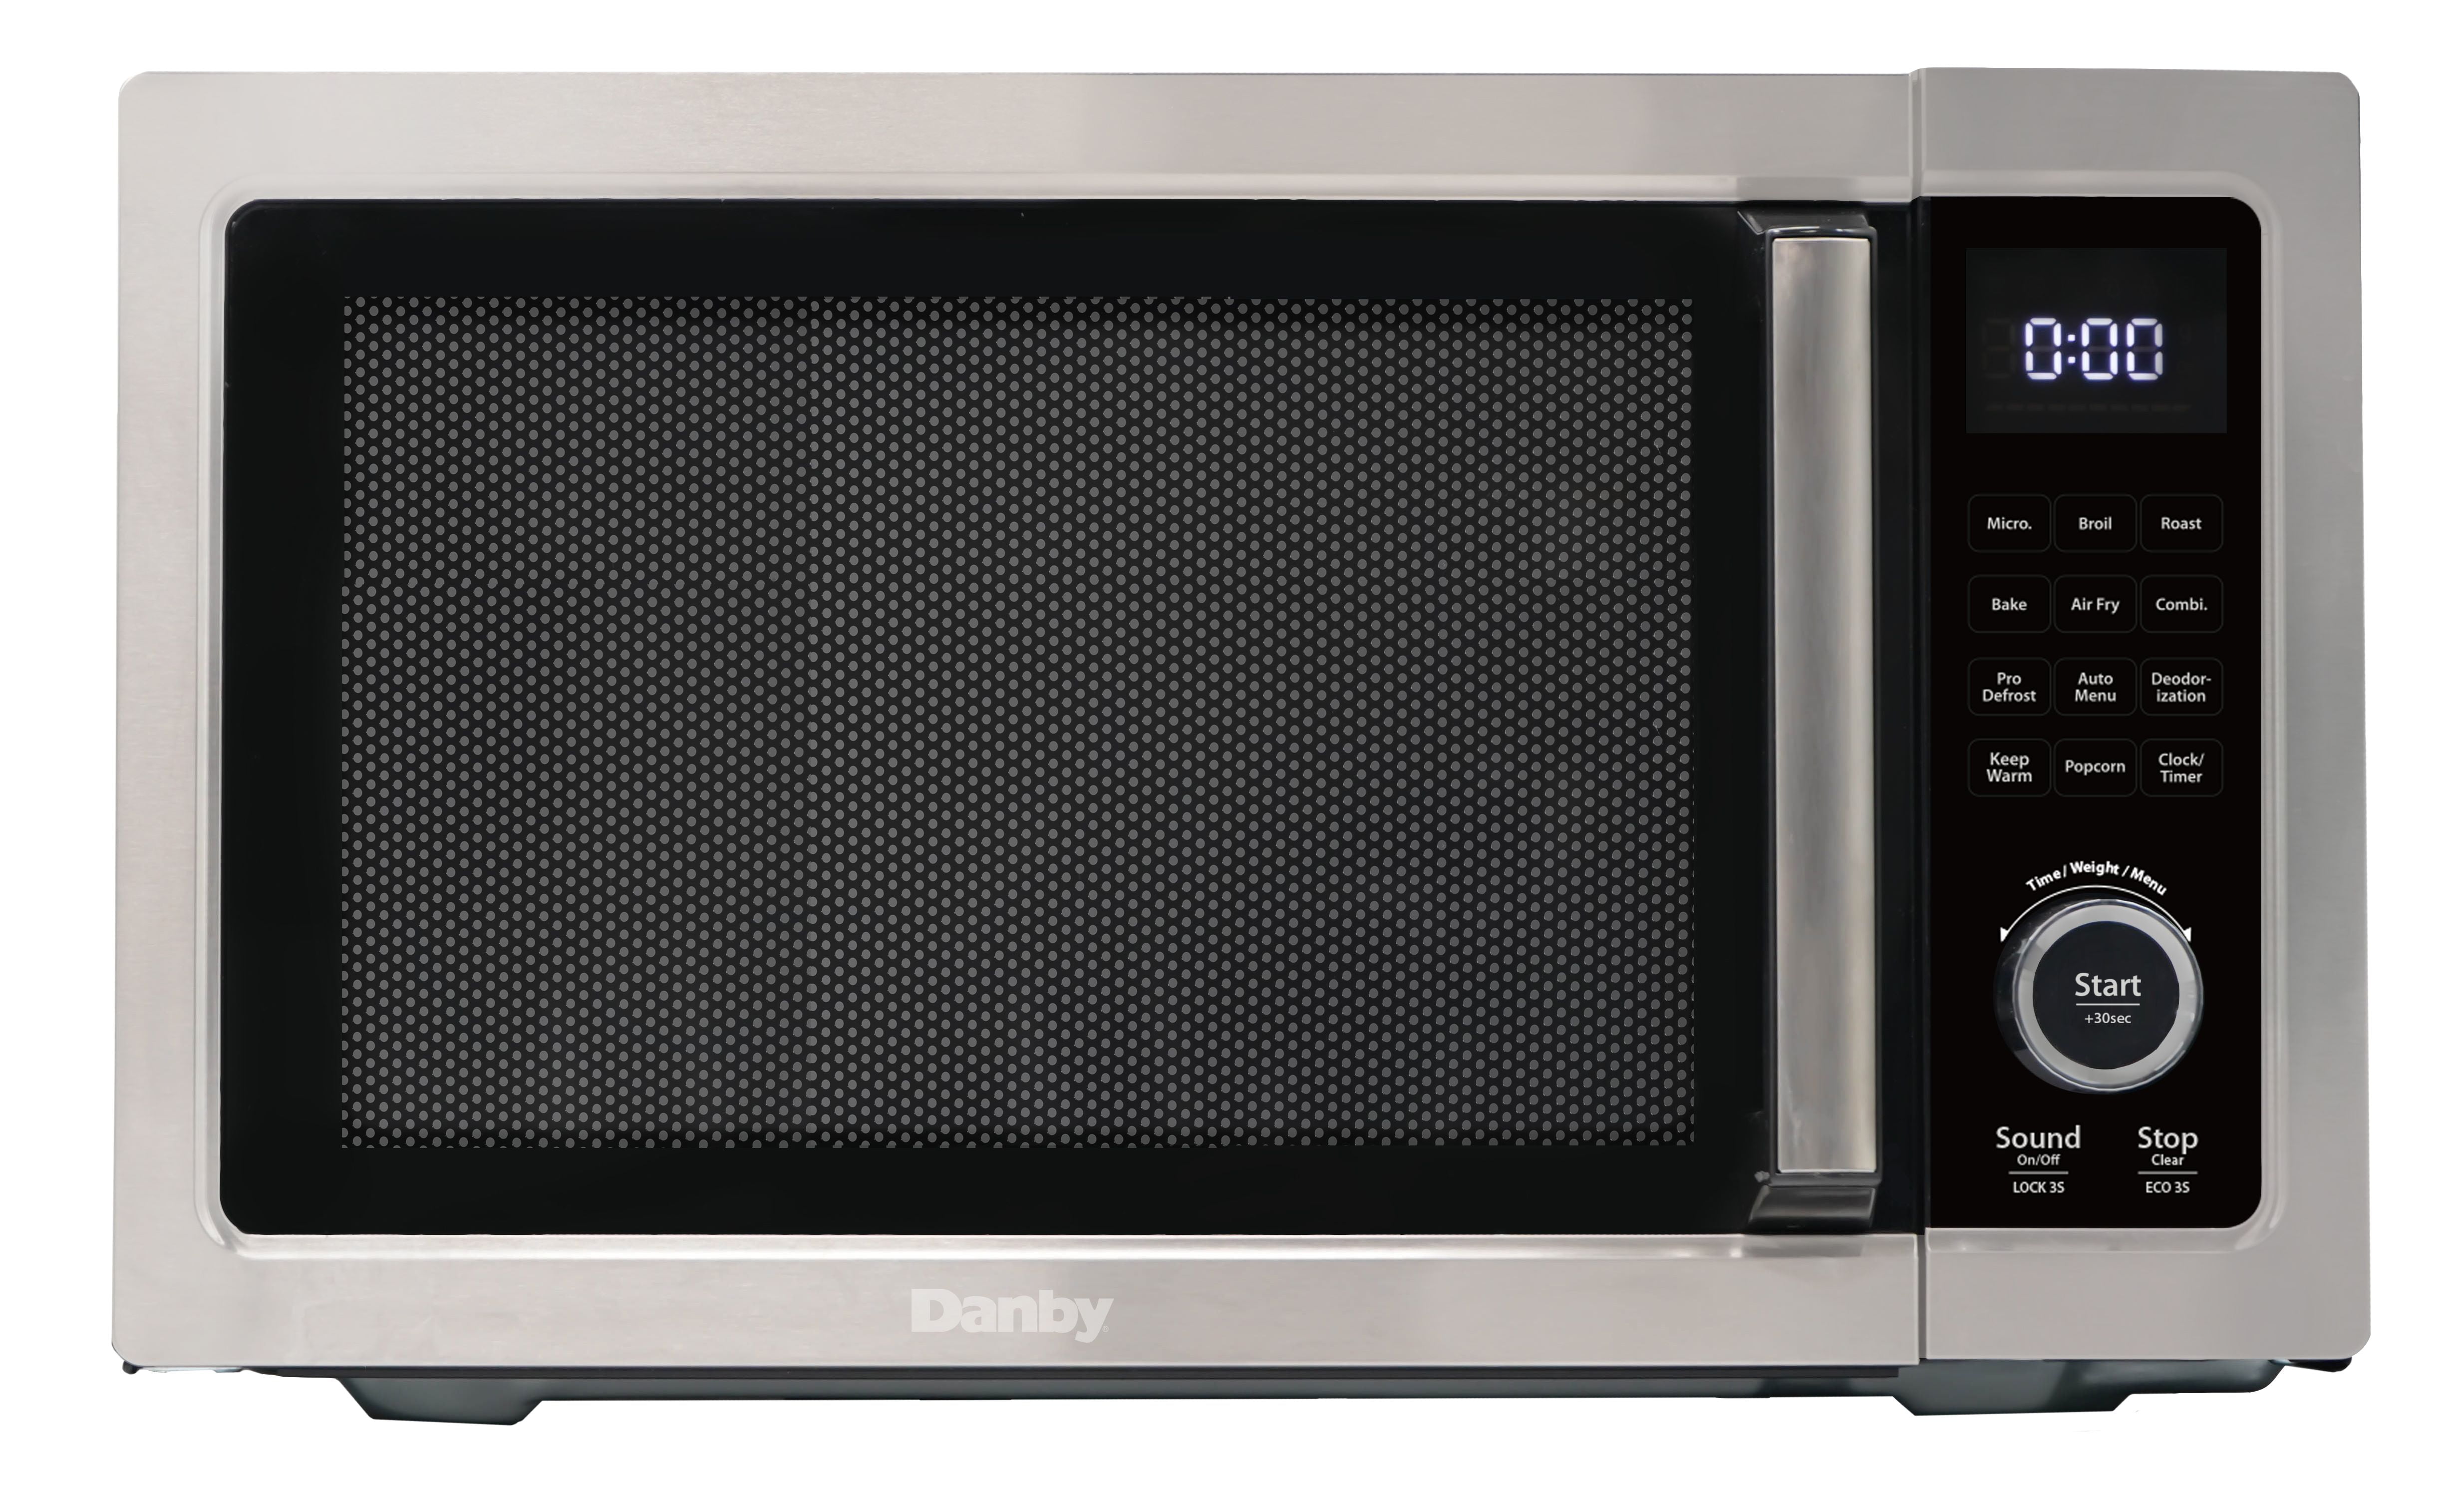 Picture of Danby DDMW1061BSS-6 1.0 cu. ft. 5 in 1 Multifunctional Microwave Oven with Air Fry, Stainless Steel